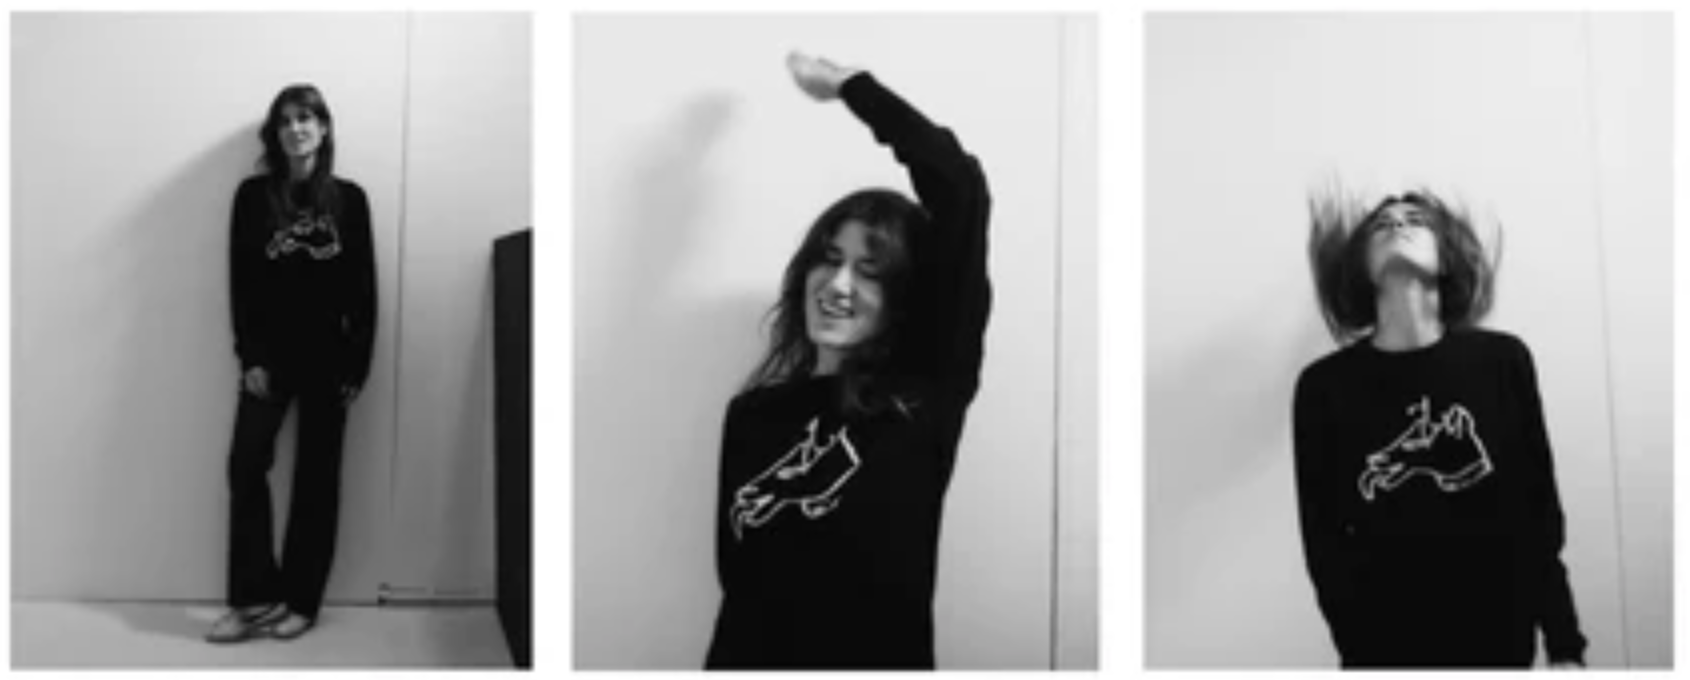 ABOUT THE BRAND: INTRODUCING BELLA FREUD!